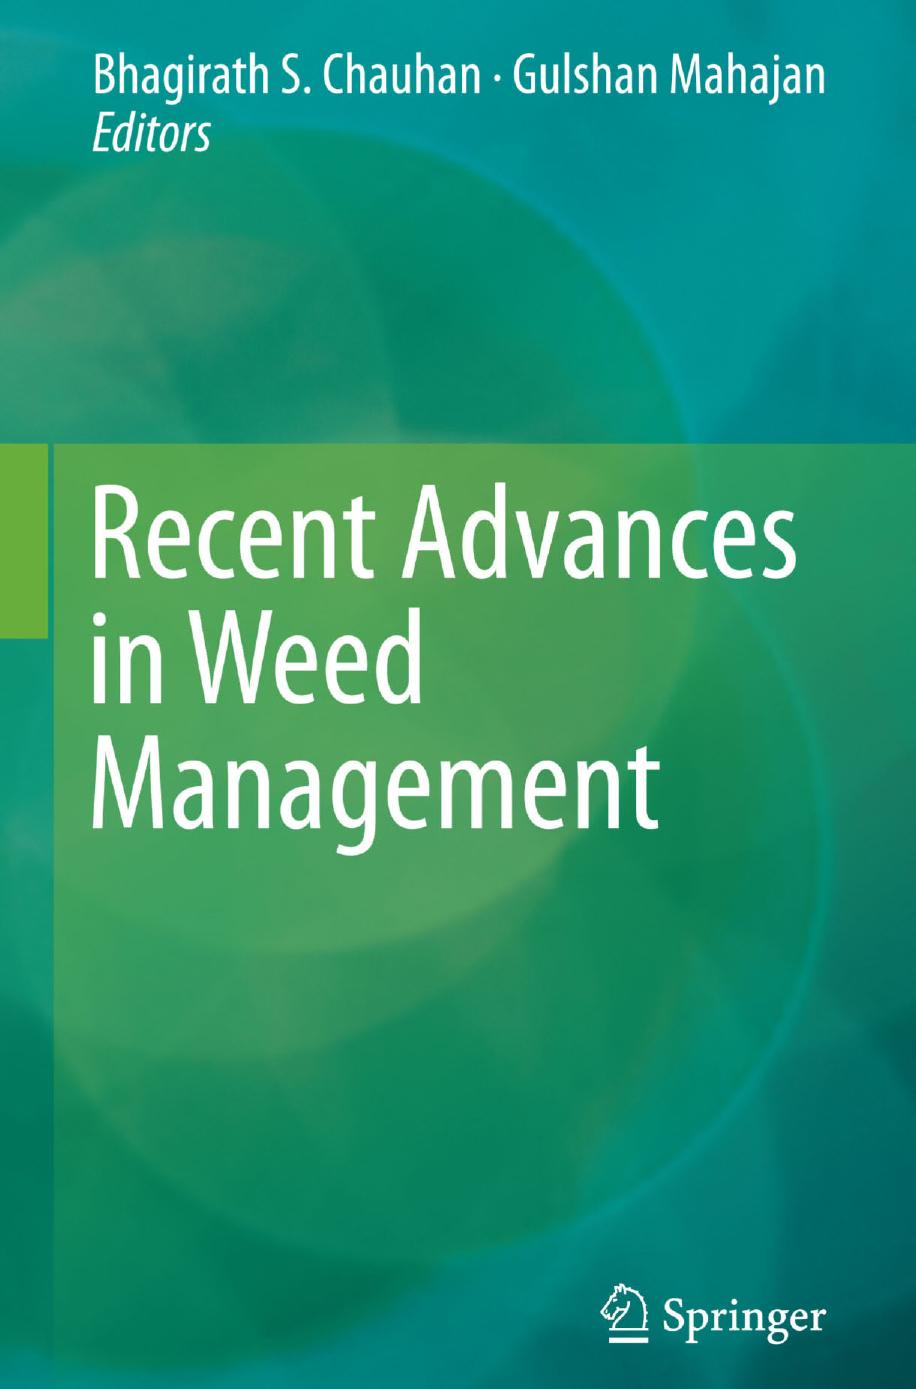 Recent Advances in Weed Management ( PDFDrive.com ), 2014